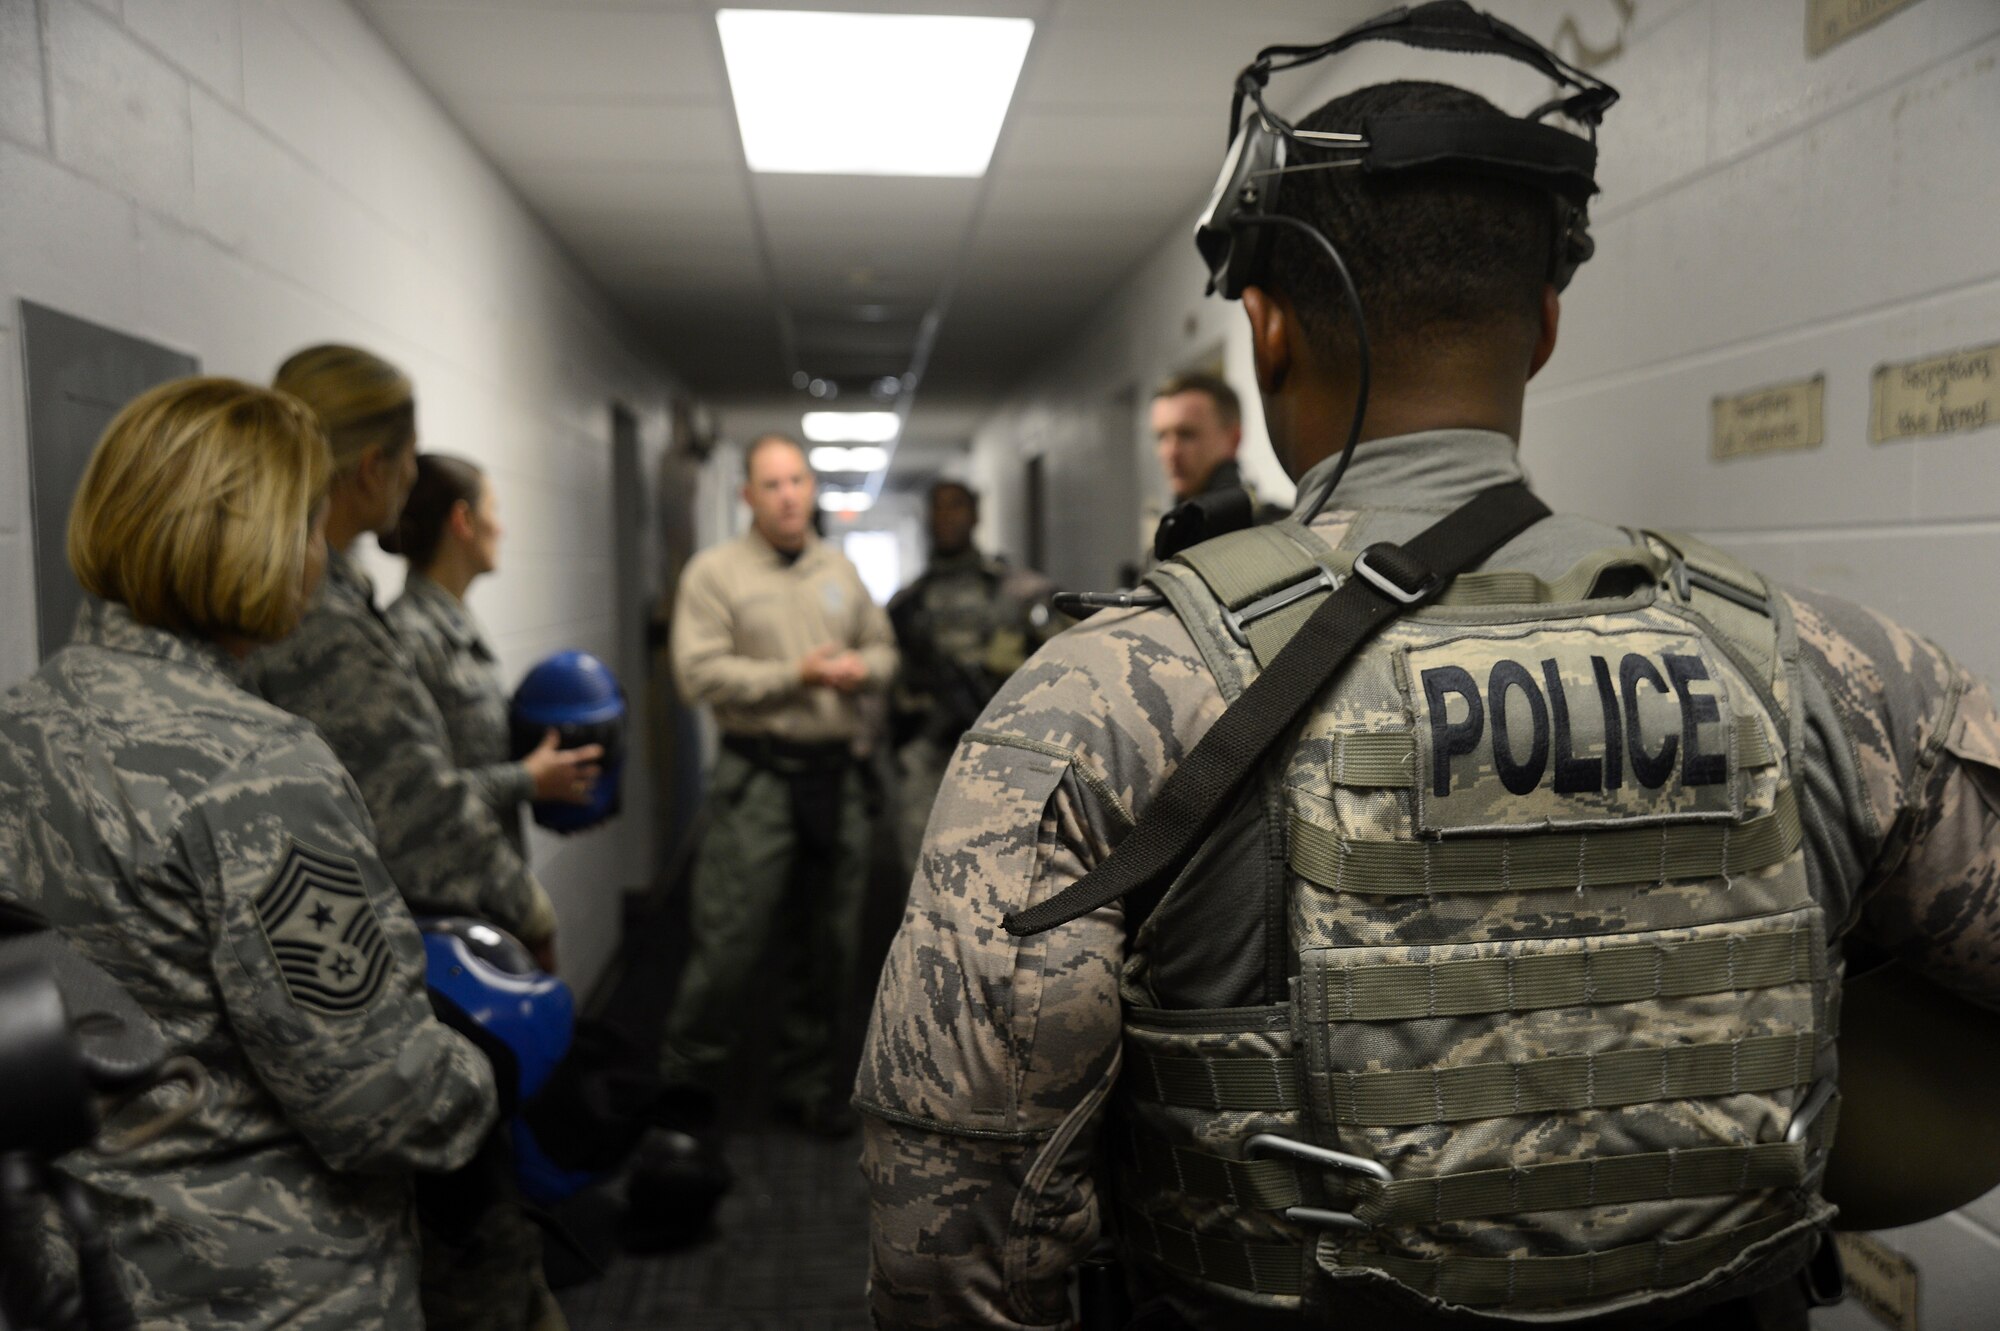 Officer Jason Atkinson, duty title assigned to the 6th Security Forces Squadron, briefs 6th Air Mobility Wing leadership on the training requirements and daily operations for emergency services team (EST) members during an immersion, Nov. 21, 2016. The EST functions are similar to civilian police departments Special Weapons and Tactics Team. (U.S. Air Force photo by Senior Airman Jenay Randolph)